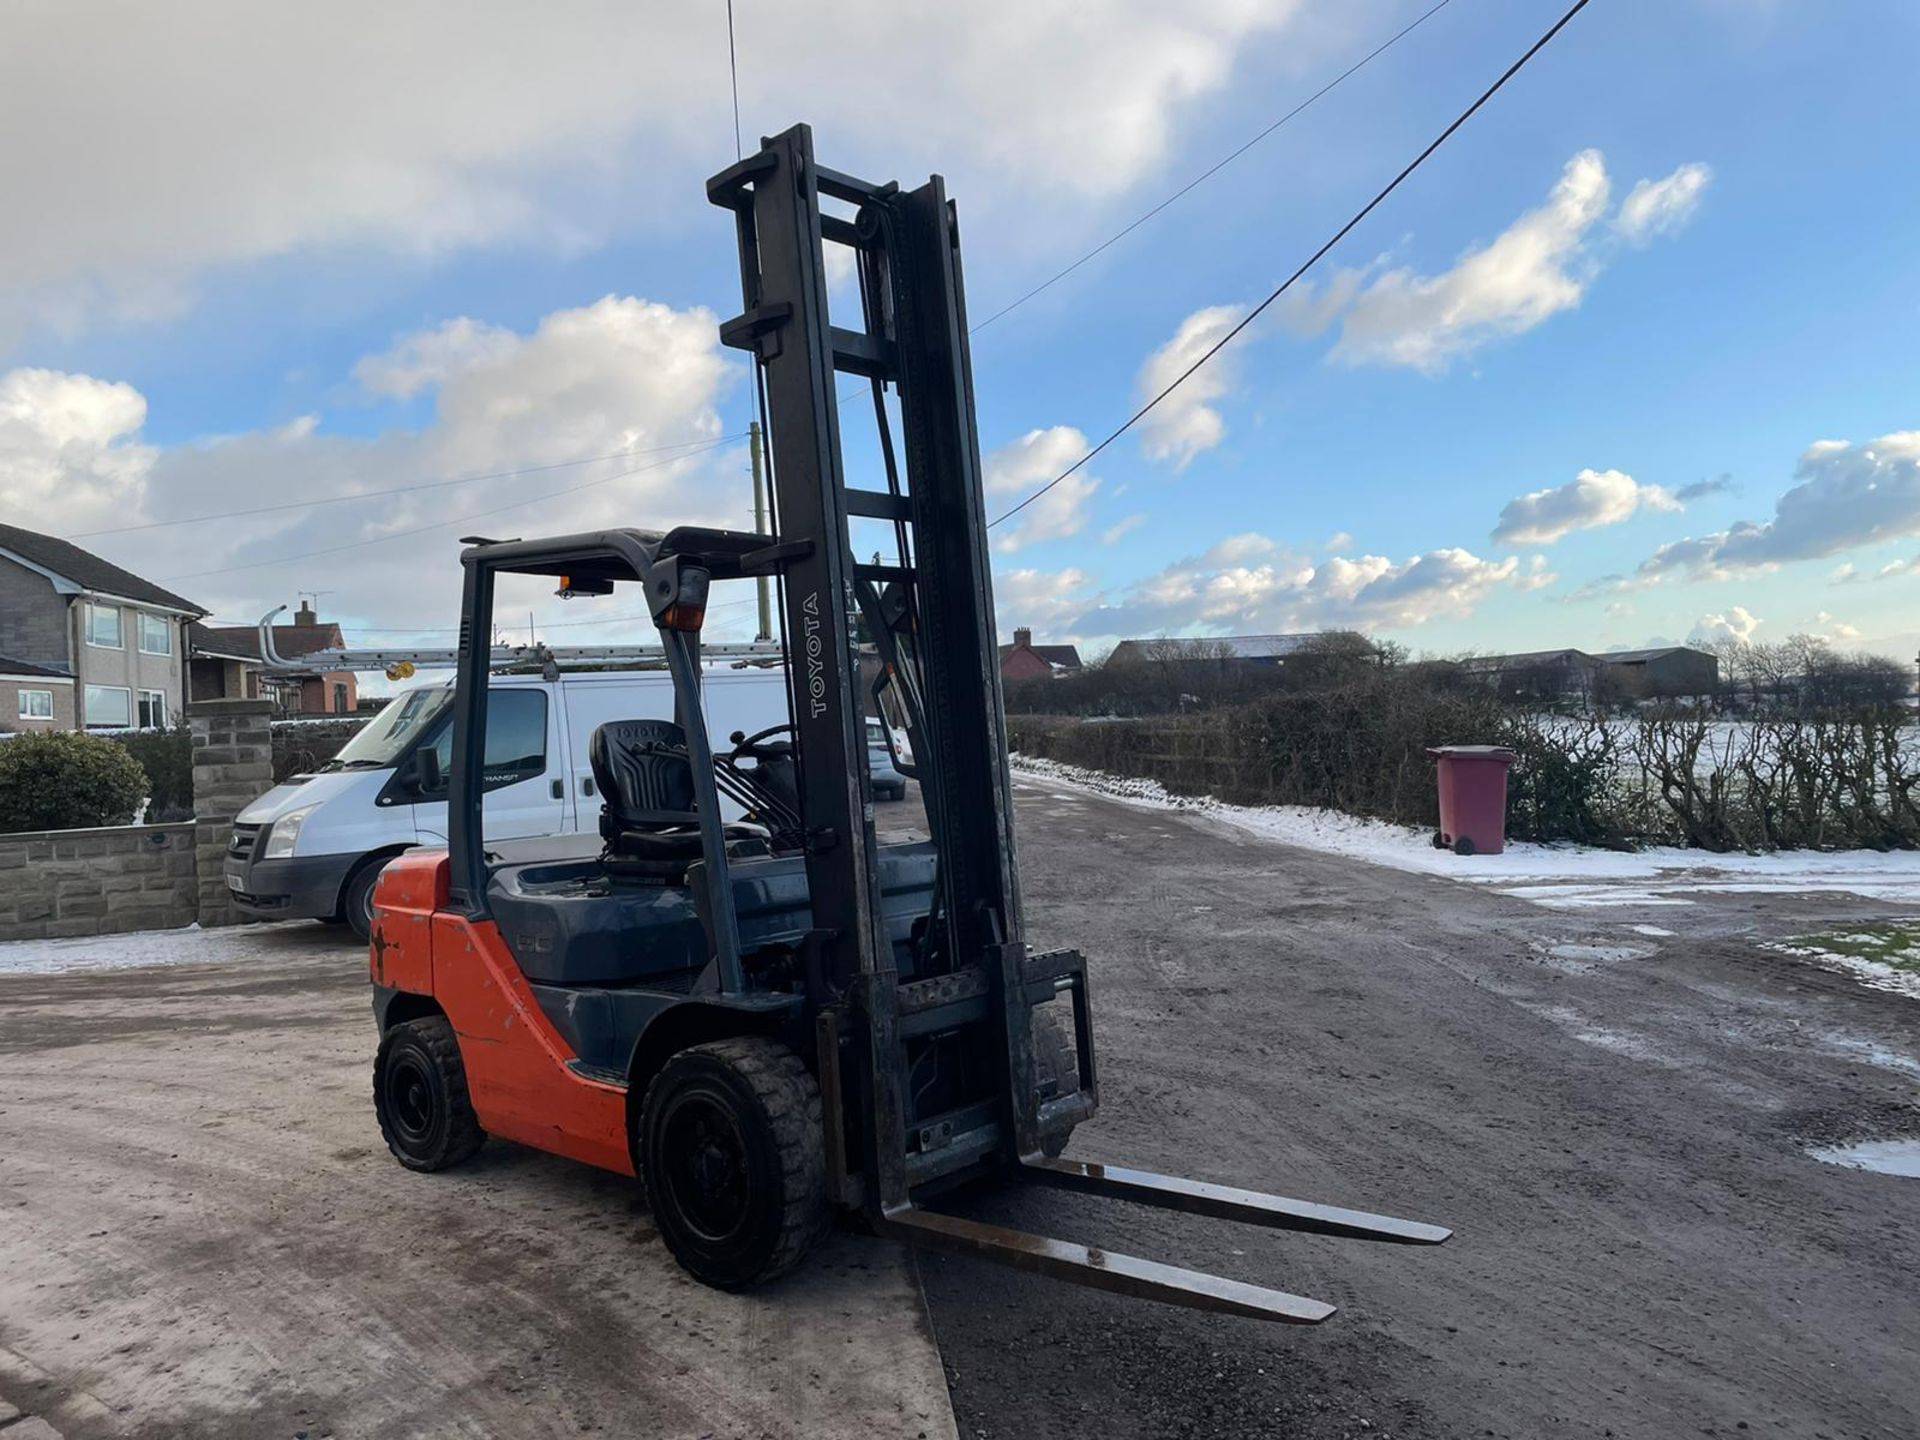 2013 TOYOTA TONERO 30 FORKLIFT, RUNS, DRIVES AND LIFTS, LOW 4720 HOURS, CLEAN MACHINE *PLUS VAT* - Image 8 of 9